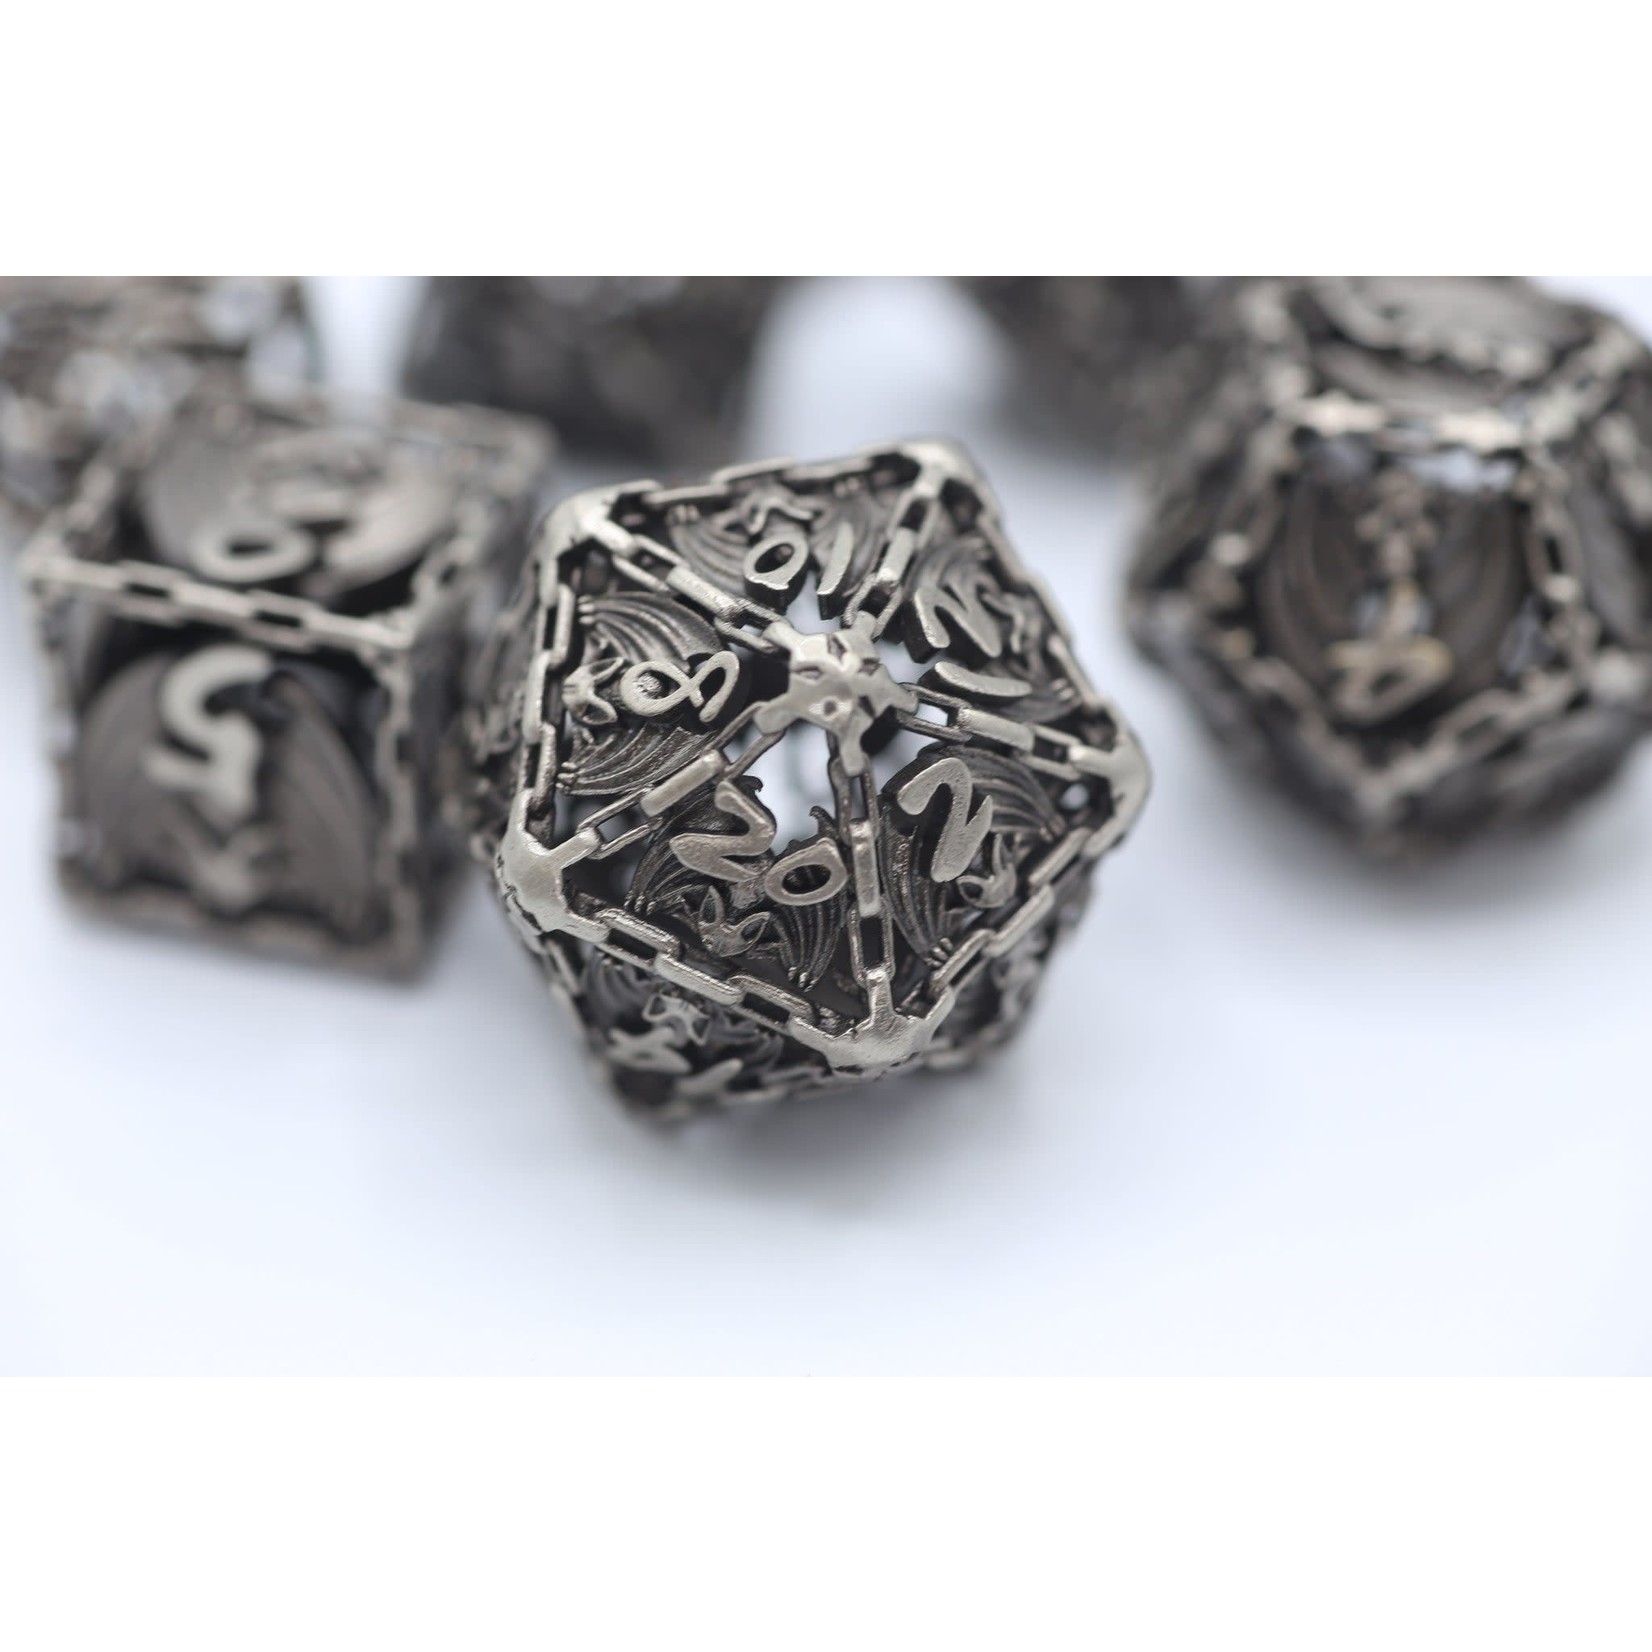 Hymgho Dice US 7-Piece Dice Set: Matte Silver, Hollow Metal in Bat Style